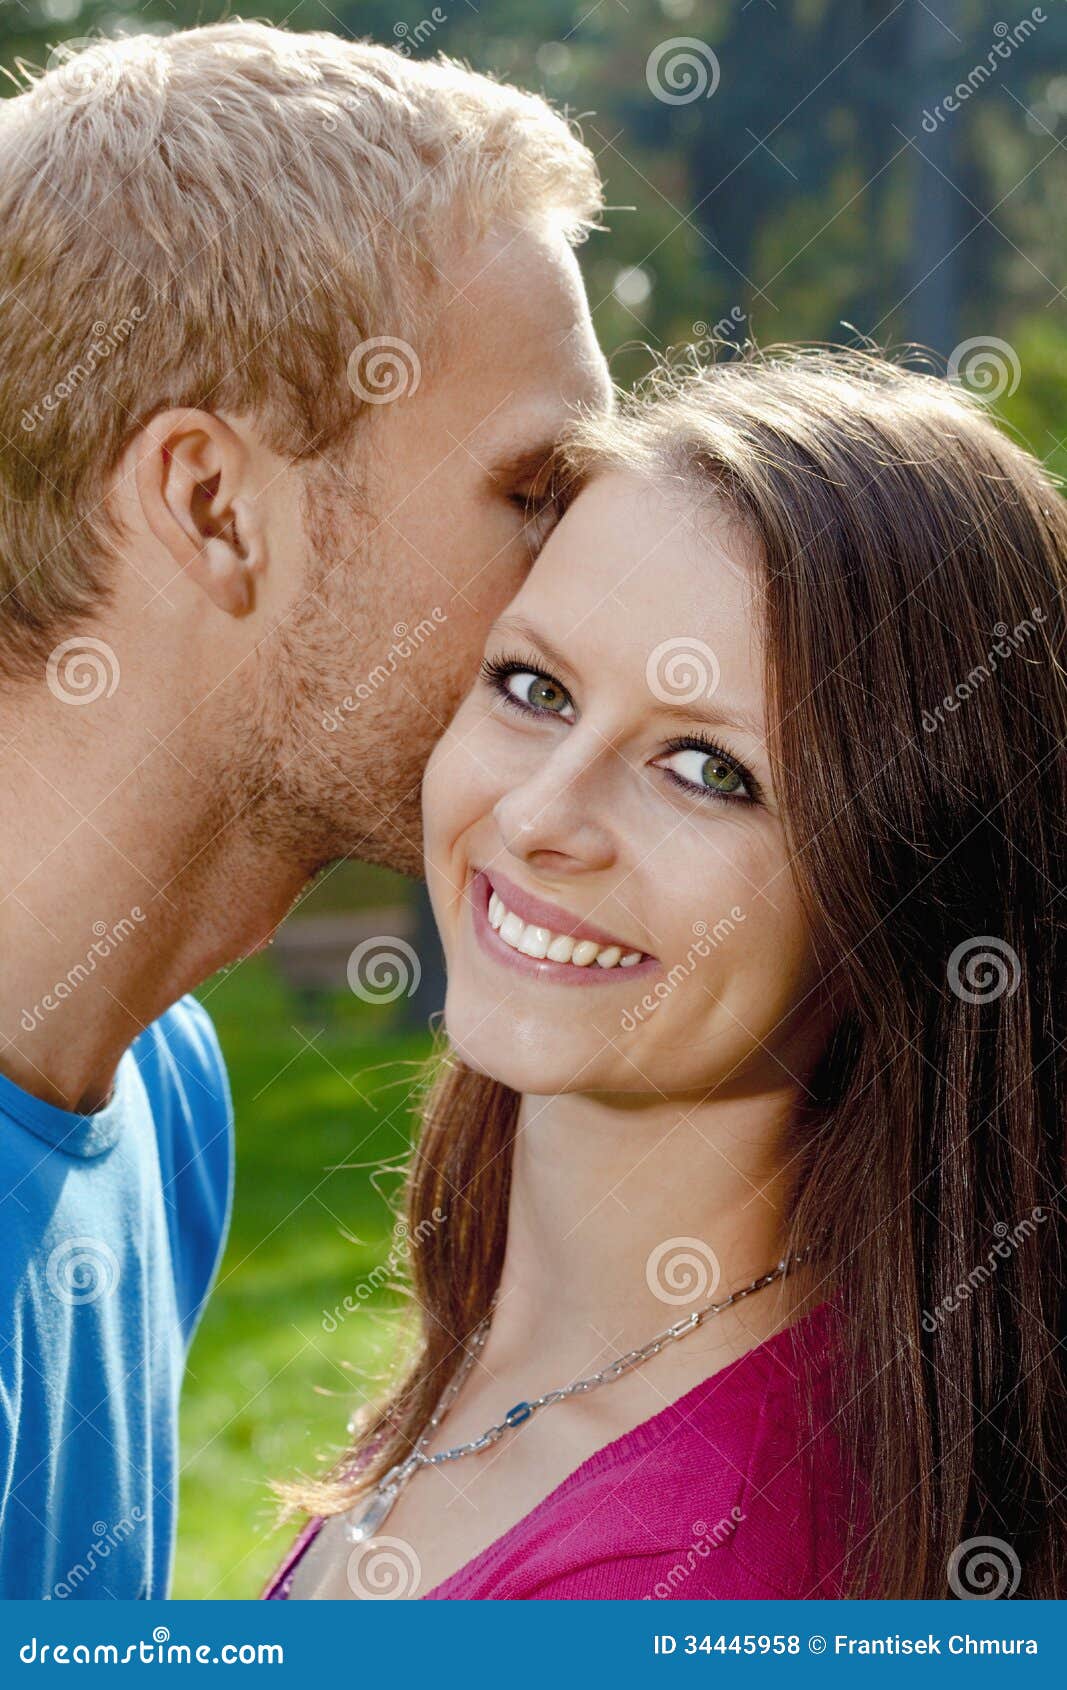 Young Girl Smiling stock photo. Image of embrace, love - 34445958